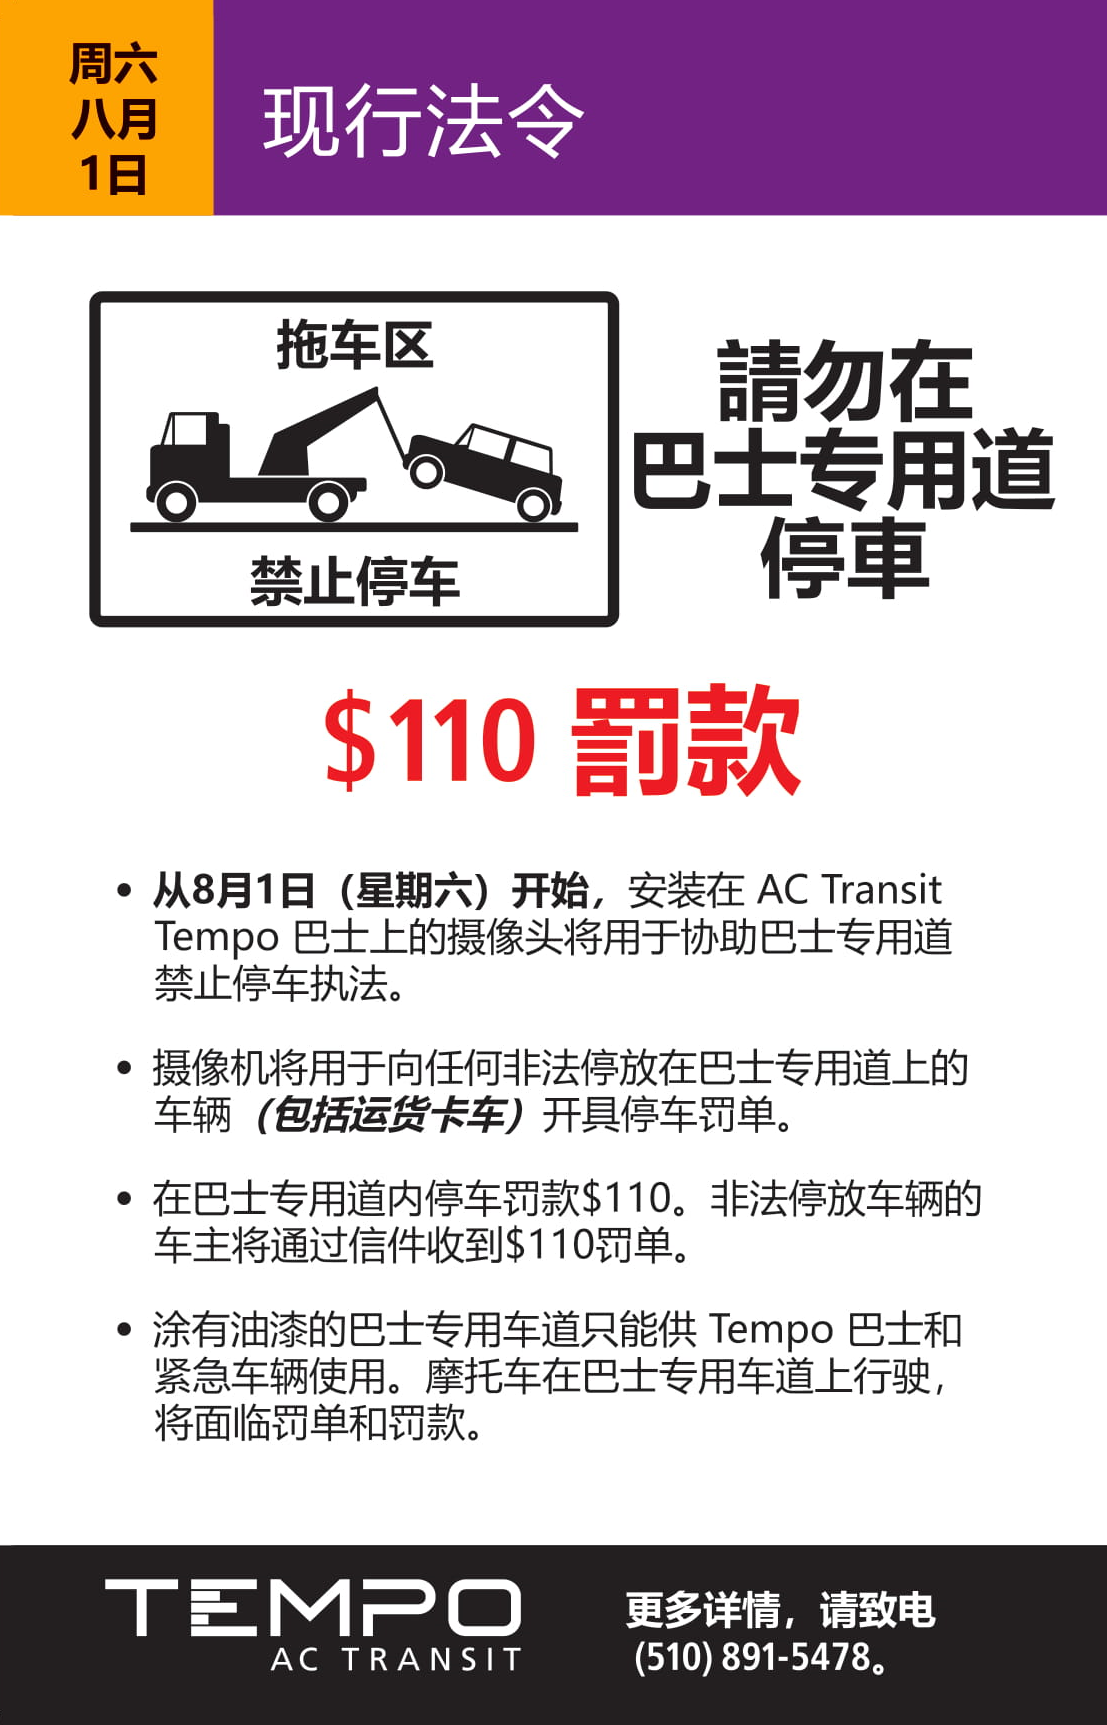 AC Transit notice about enforcement of the bus only lanes in Chinese